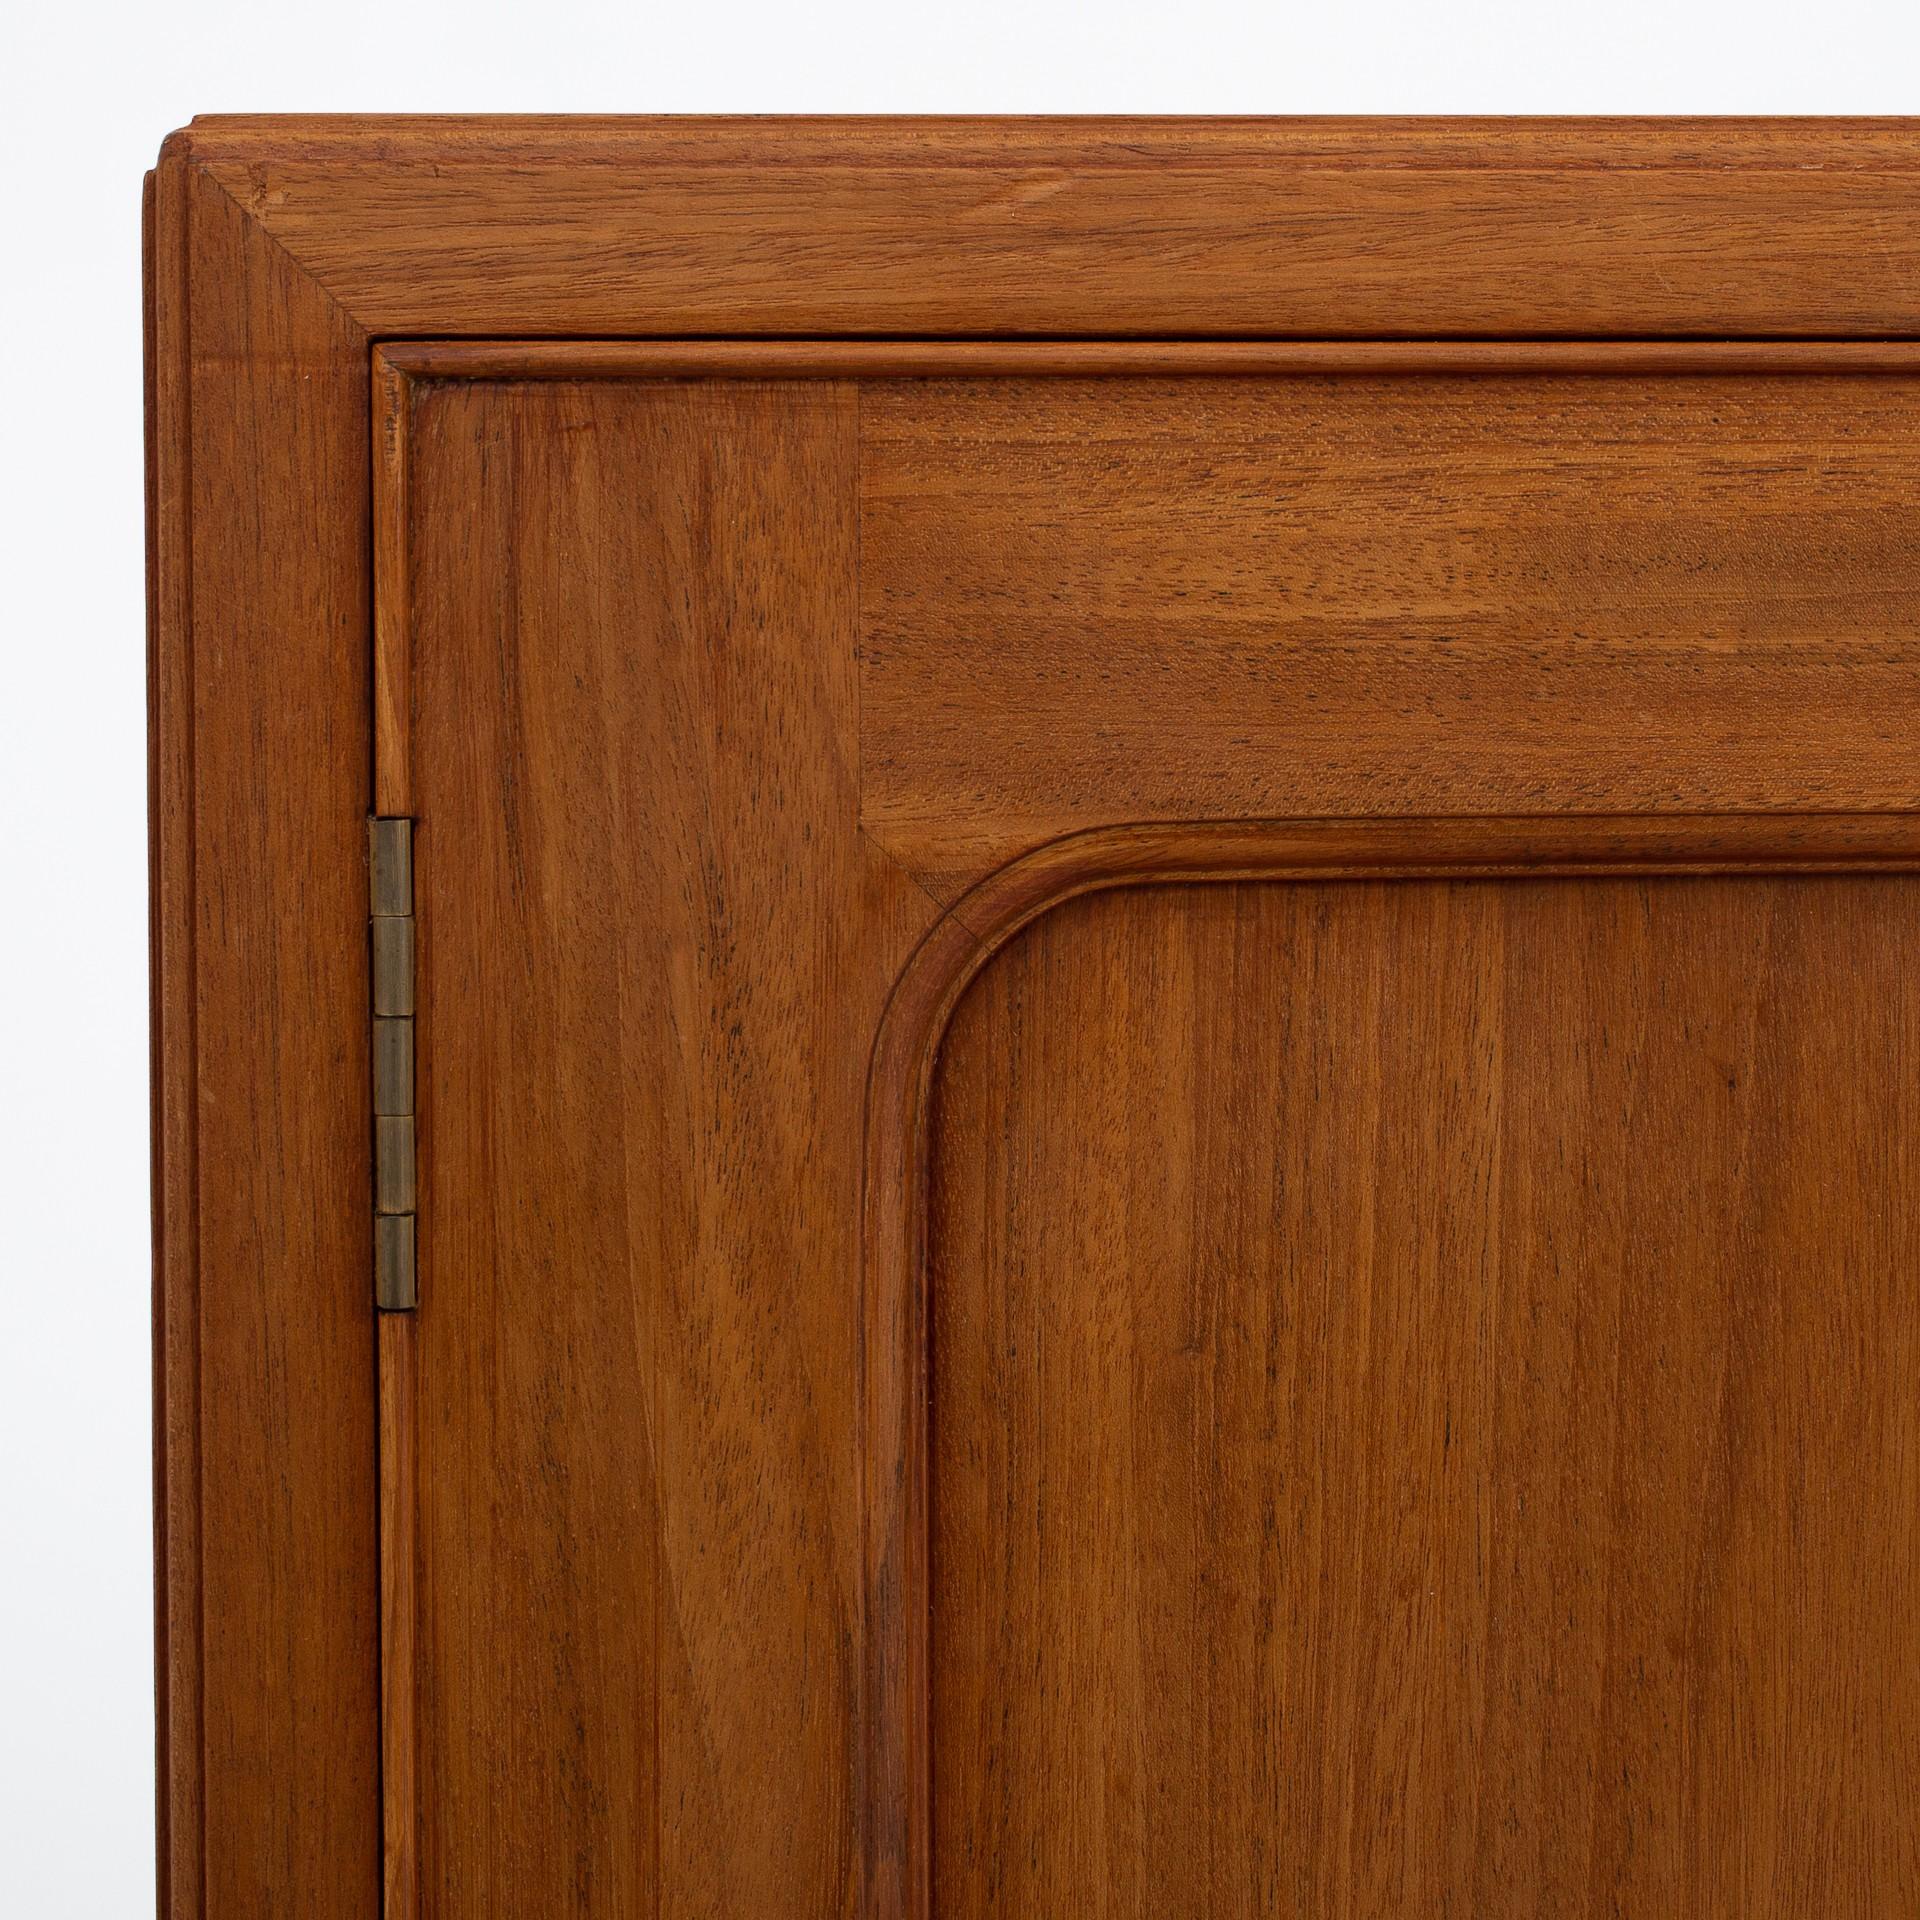 Sideboard in Cuban mahogany on an eight-legged frame with two doors, three drawers and three pullout plates. Grips and key holes of brass, 1940s. Maker Rud. Rasmussen.